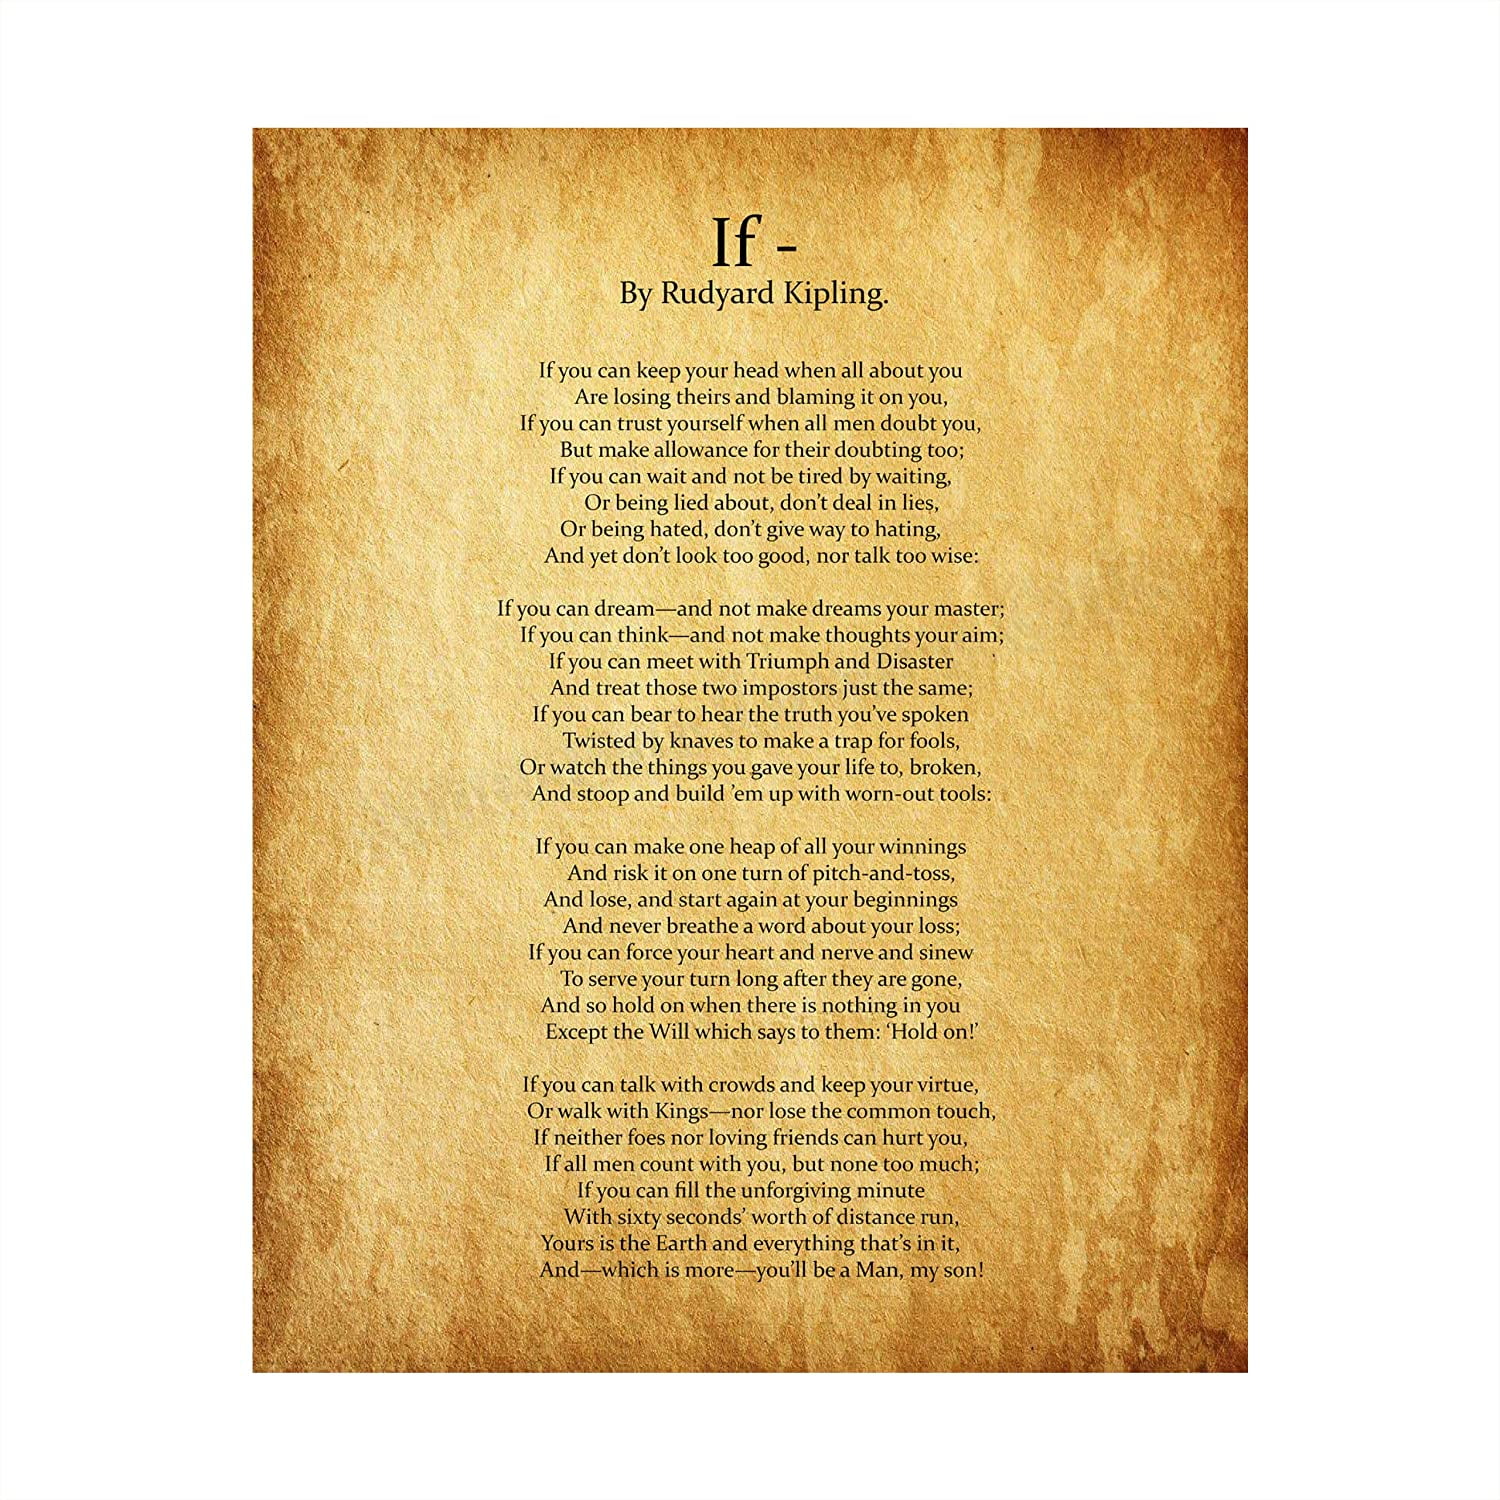 Respeto a ti mismo Tratamiento Preferencial Doctrina IF You Can Keep Your Head"- Rudyard Kipling Poem Page Print-8 x 10" Poetic  Wall Art. Distressed Parchment Print-Ready To Frame. Retro  Home-Office-School-Library Decor. Great Art Gift for Poetry Fans. -  Walmart.com